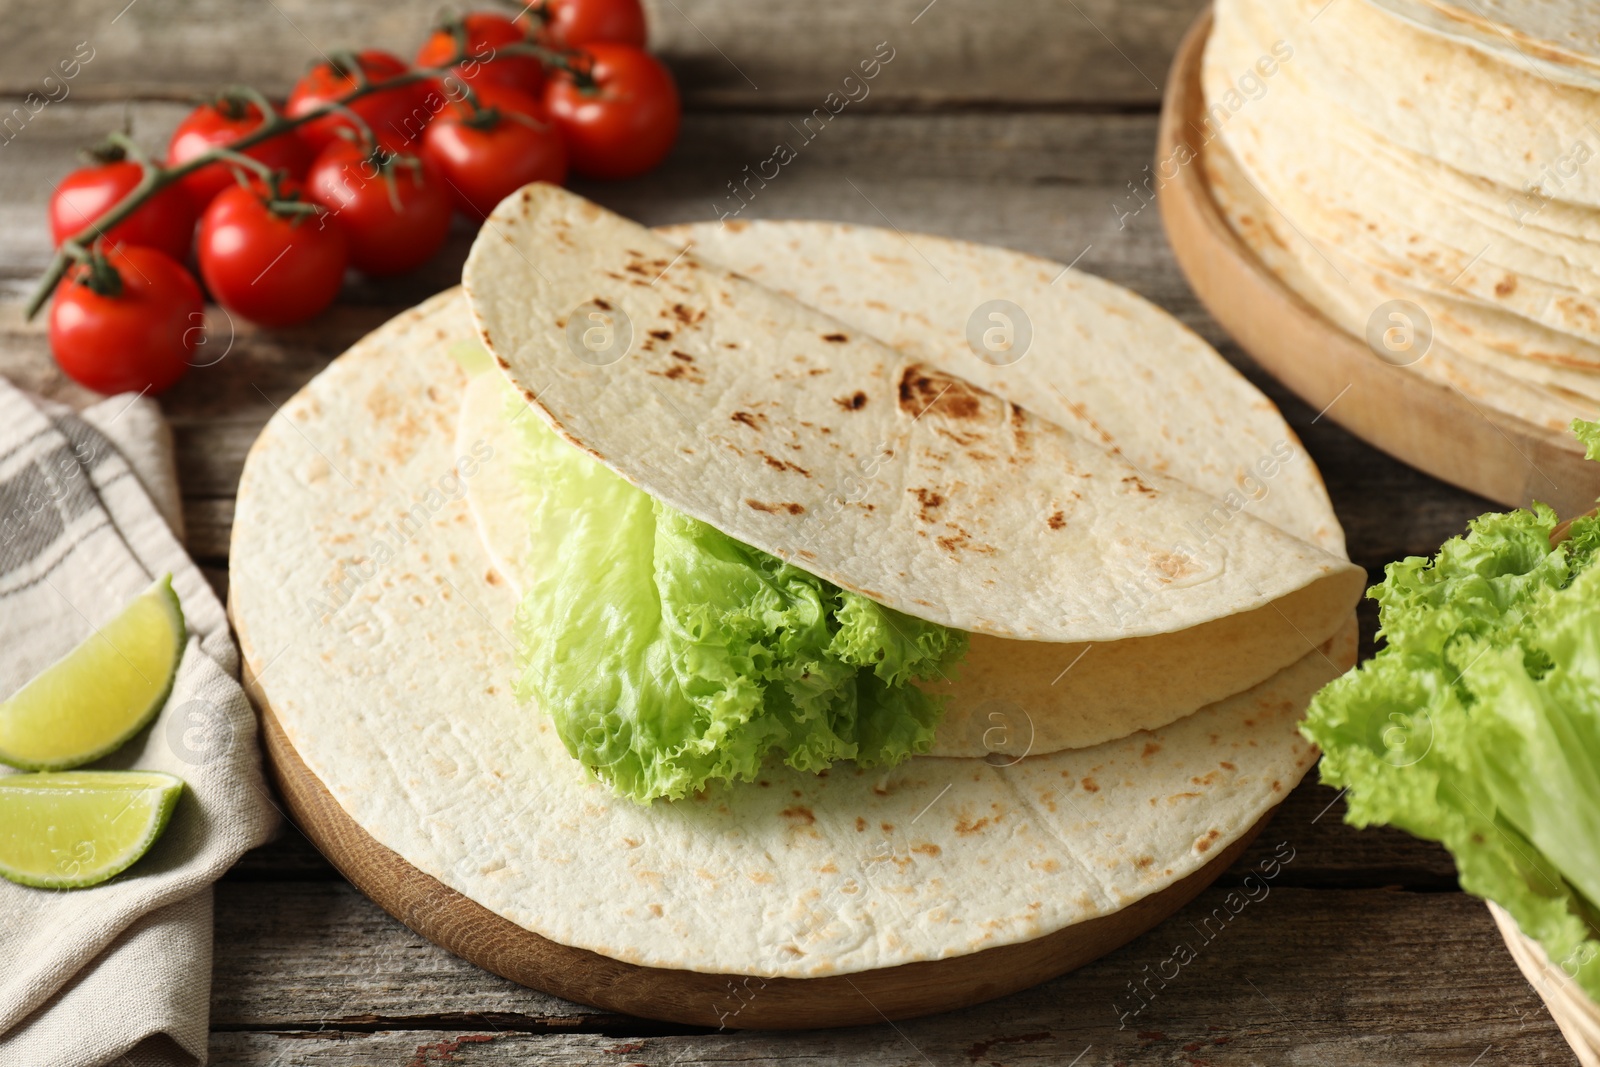 Photo of Tasty homemade tortillas, tomatoes, lime and lettuce on wooden table